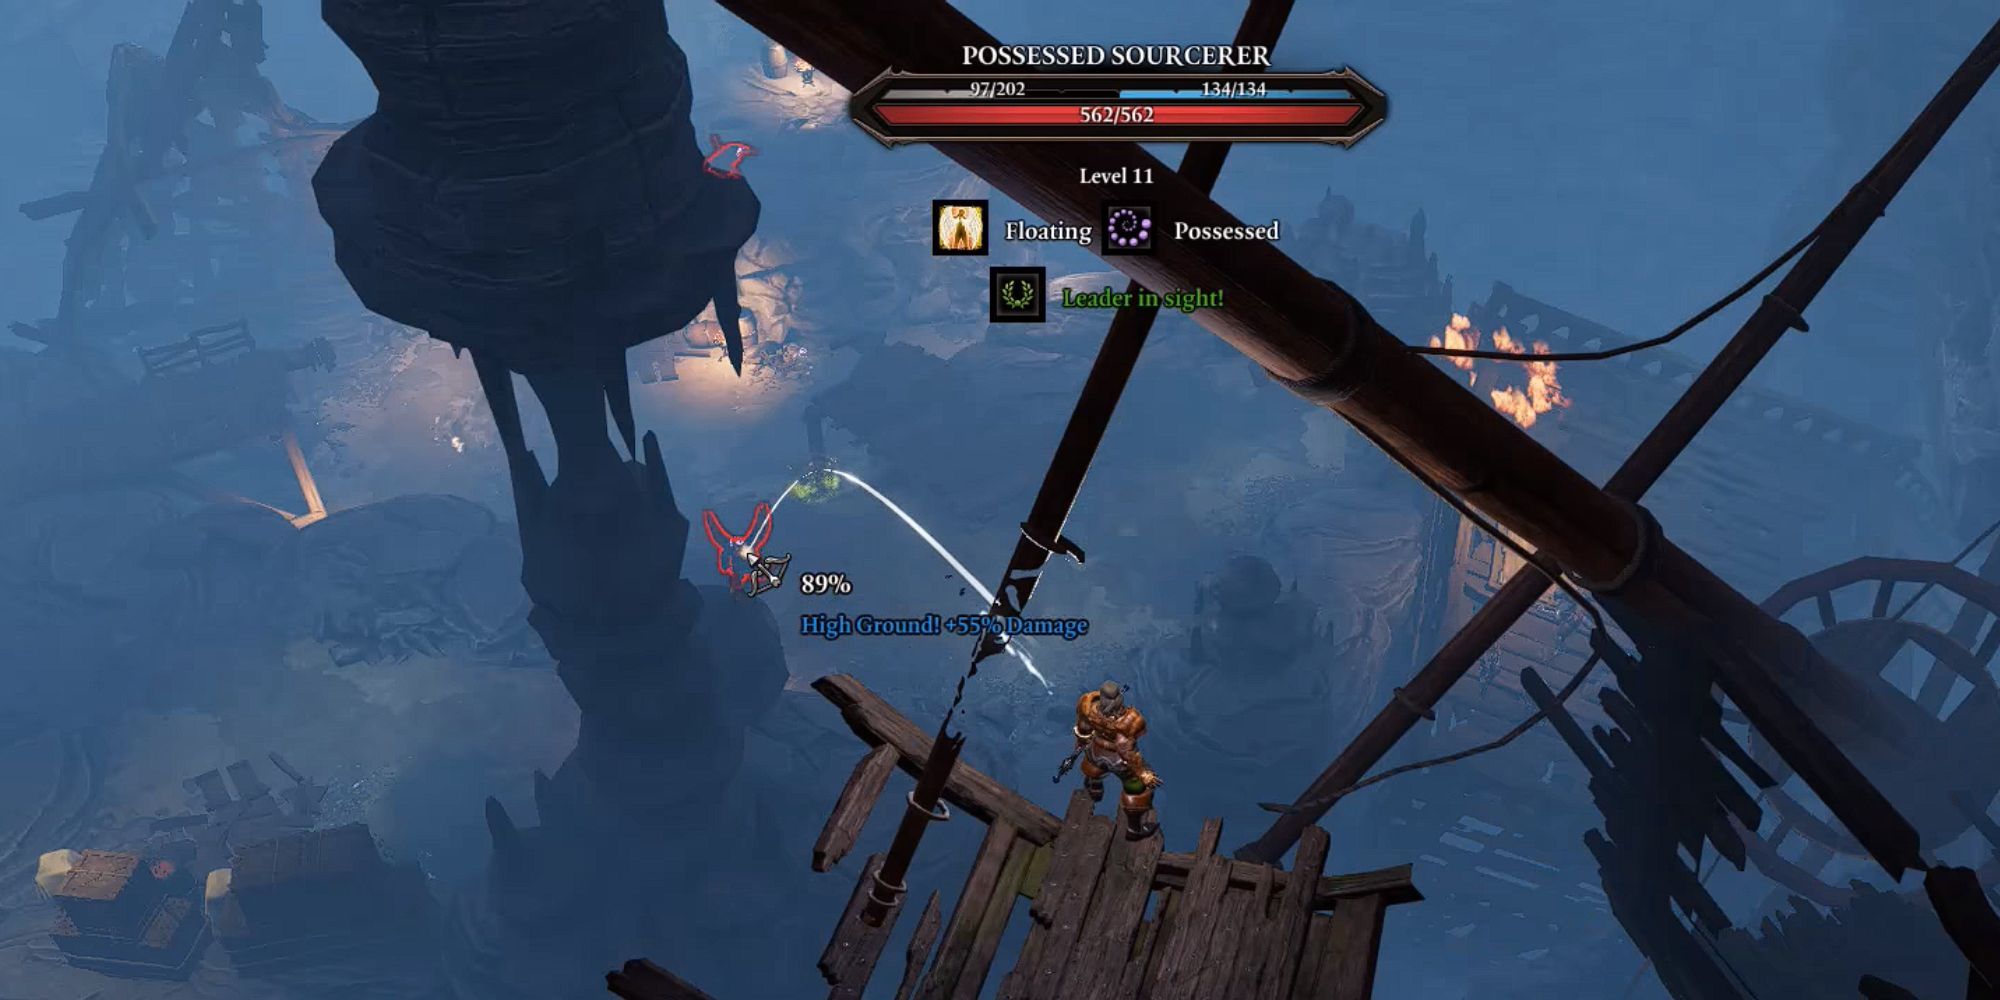 Divinity Original Sin II - Ifan attacking a Possessed Sourcerer from out of the main fight